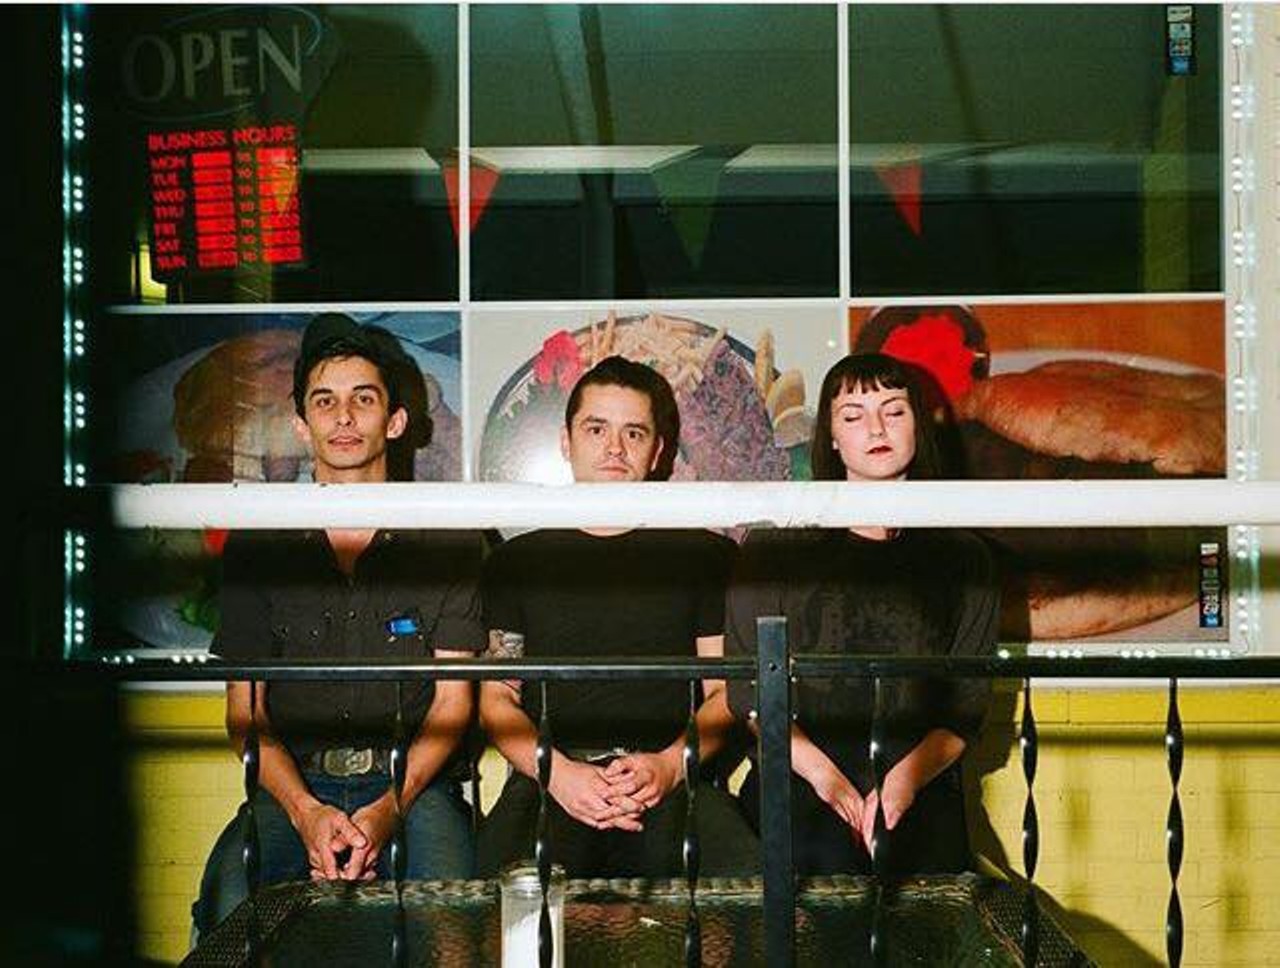 Prude Boys 
This garage rock threesome hails from Hamtramck. Last year, Prude Boys released two excellent EPs &#151; The Outlaw and Talking to Myself &#151; which both landed on our Best Music of 2017 list. Plan on them rocking out in front of a hometown crowd at PLAV Post #10 on Friday night at 1 a.m.
Photo via Prude Boys Facebook